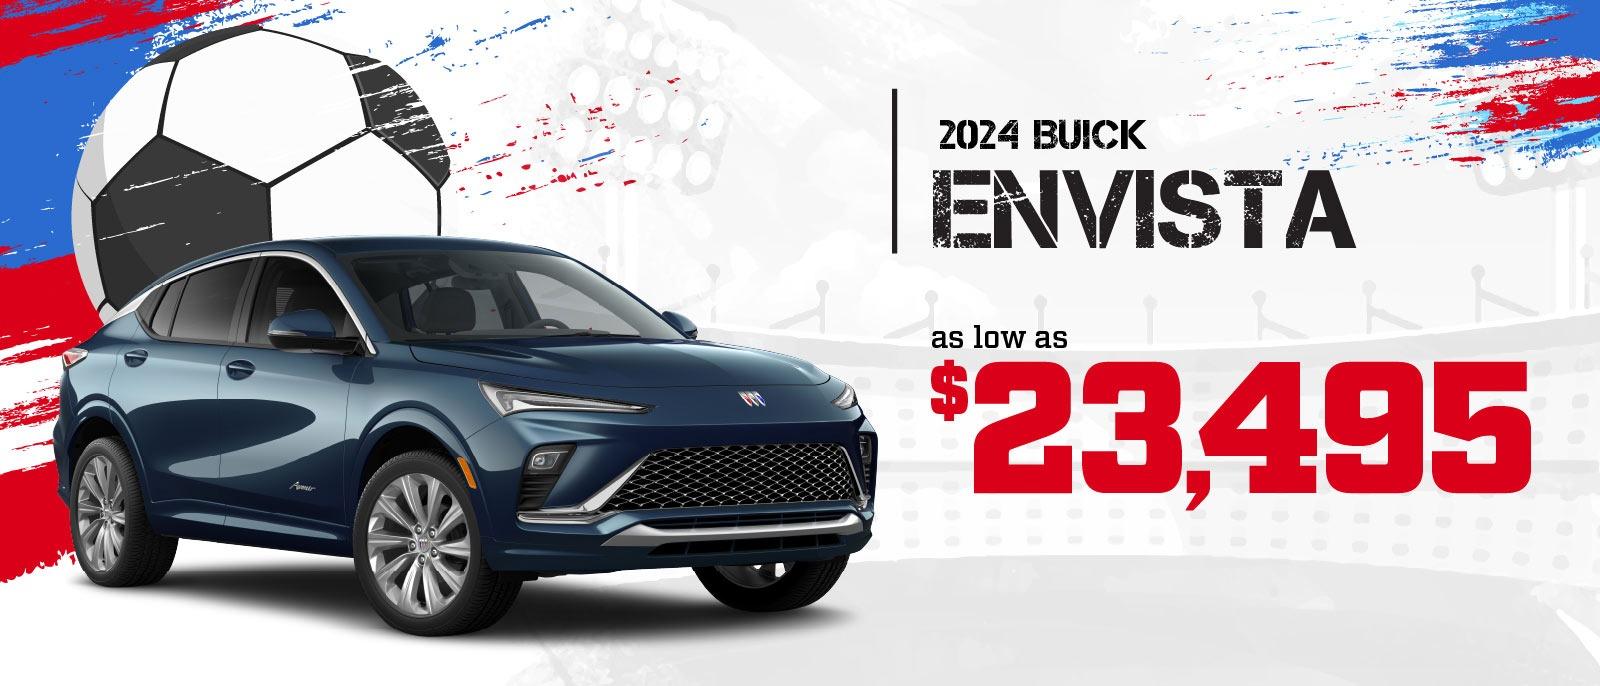 2024 Buick Envista - as low as $23,495 | Reserve Yours!